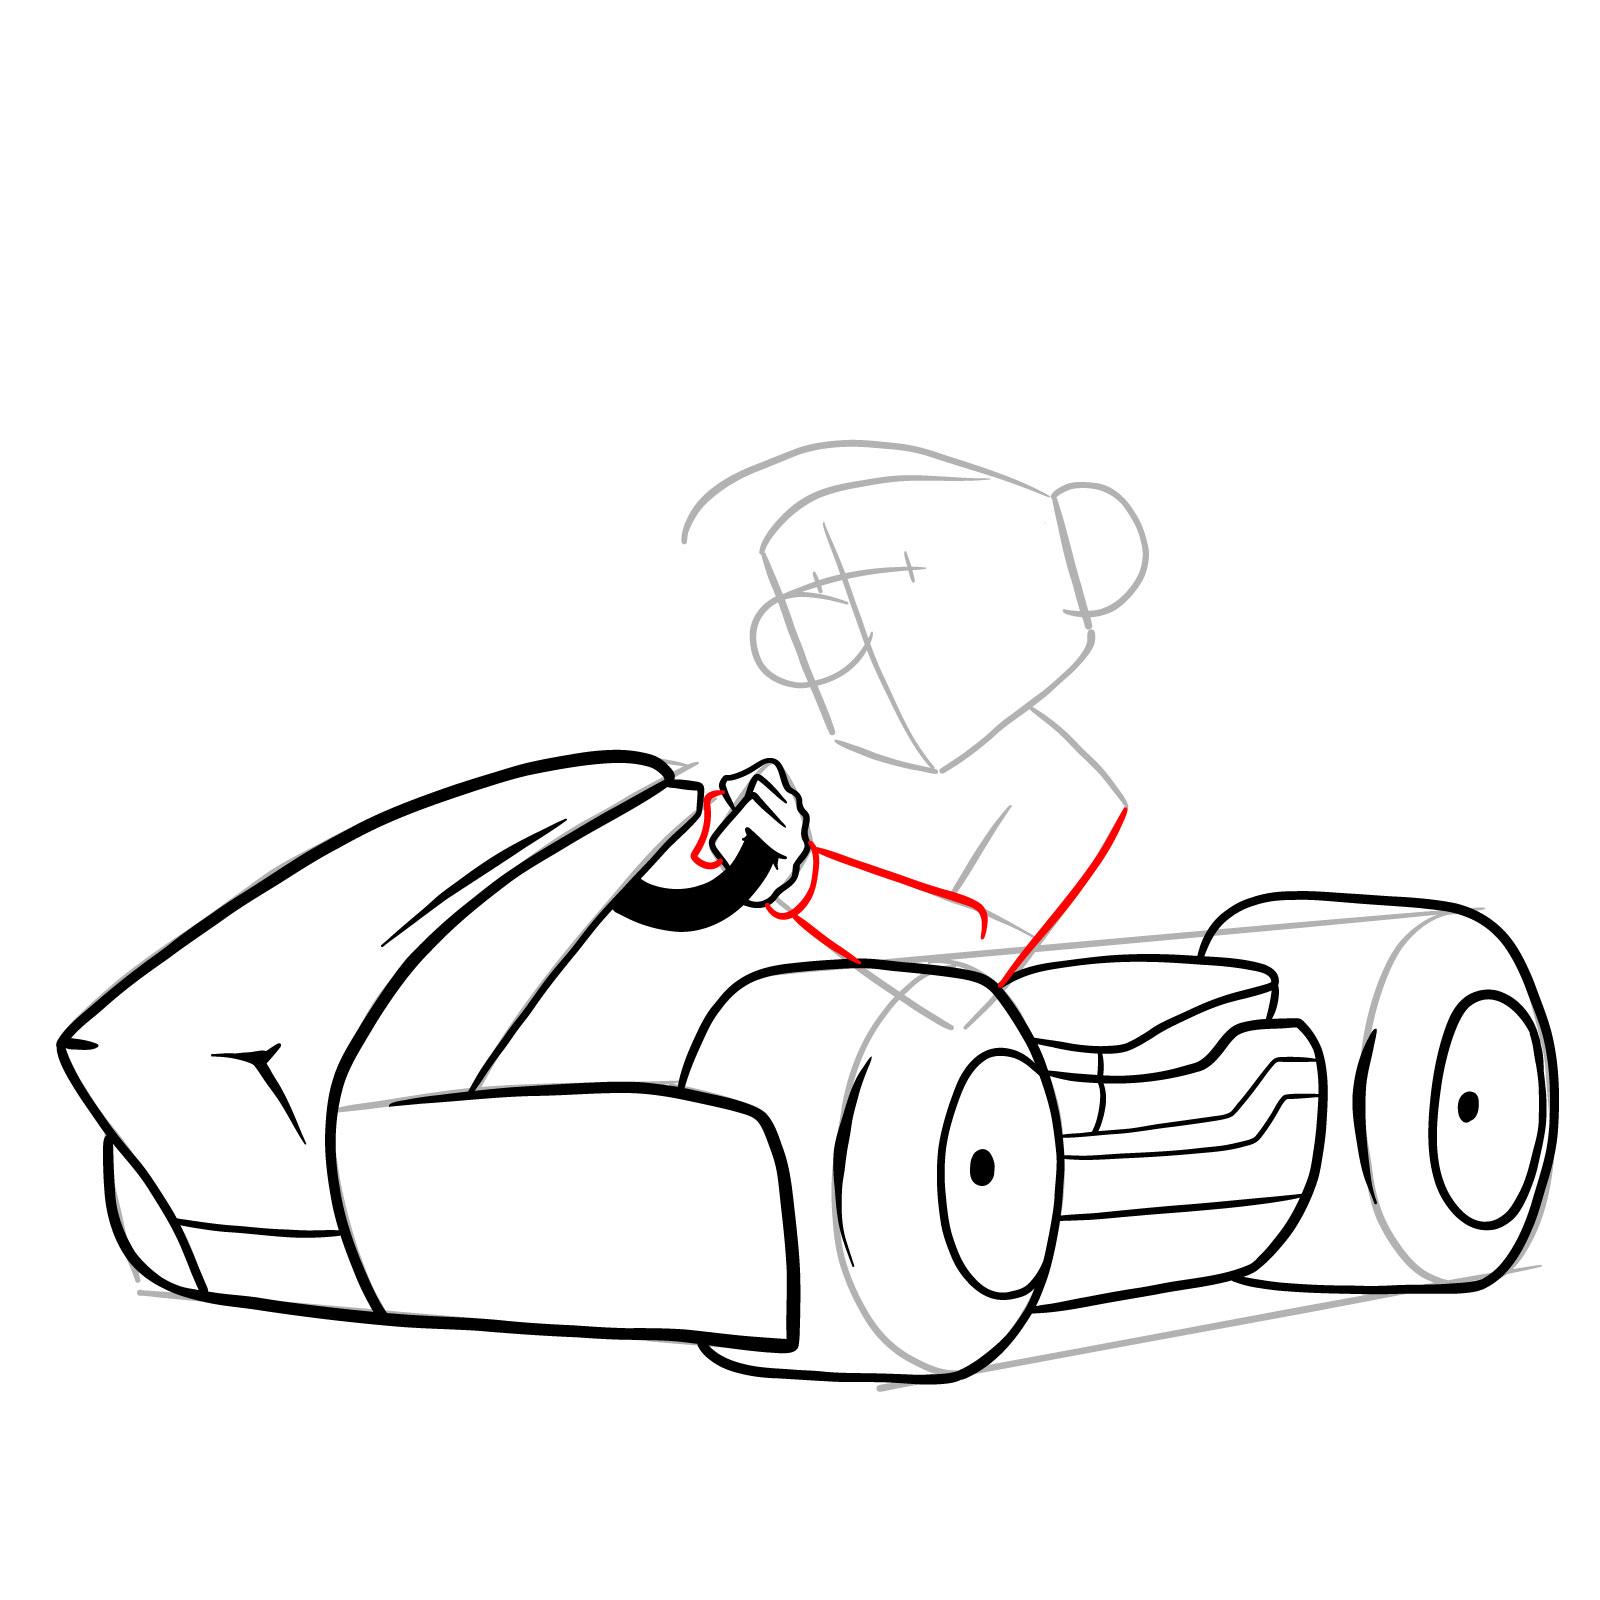 How to draw Race Traitors Mario - step 18